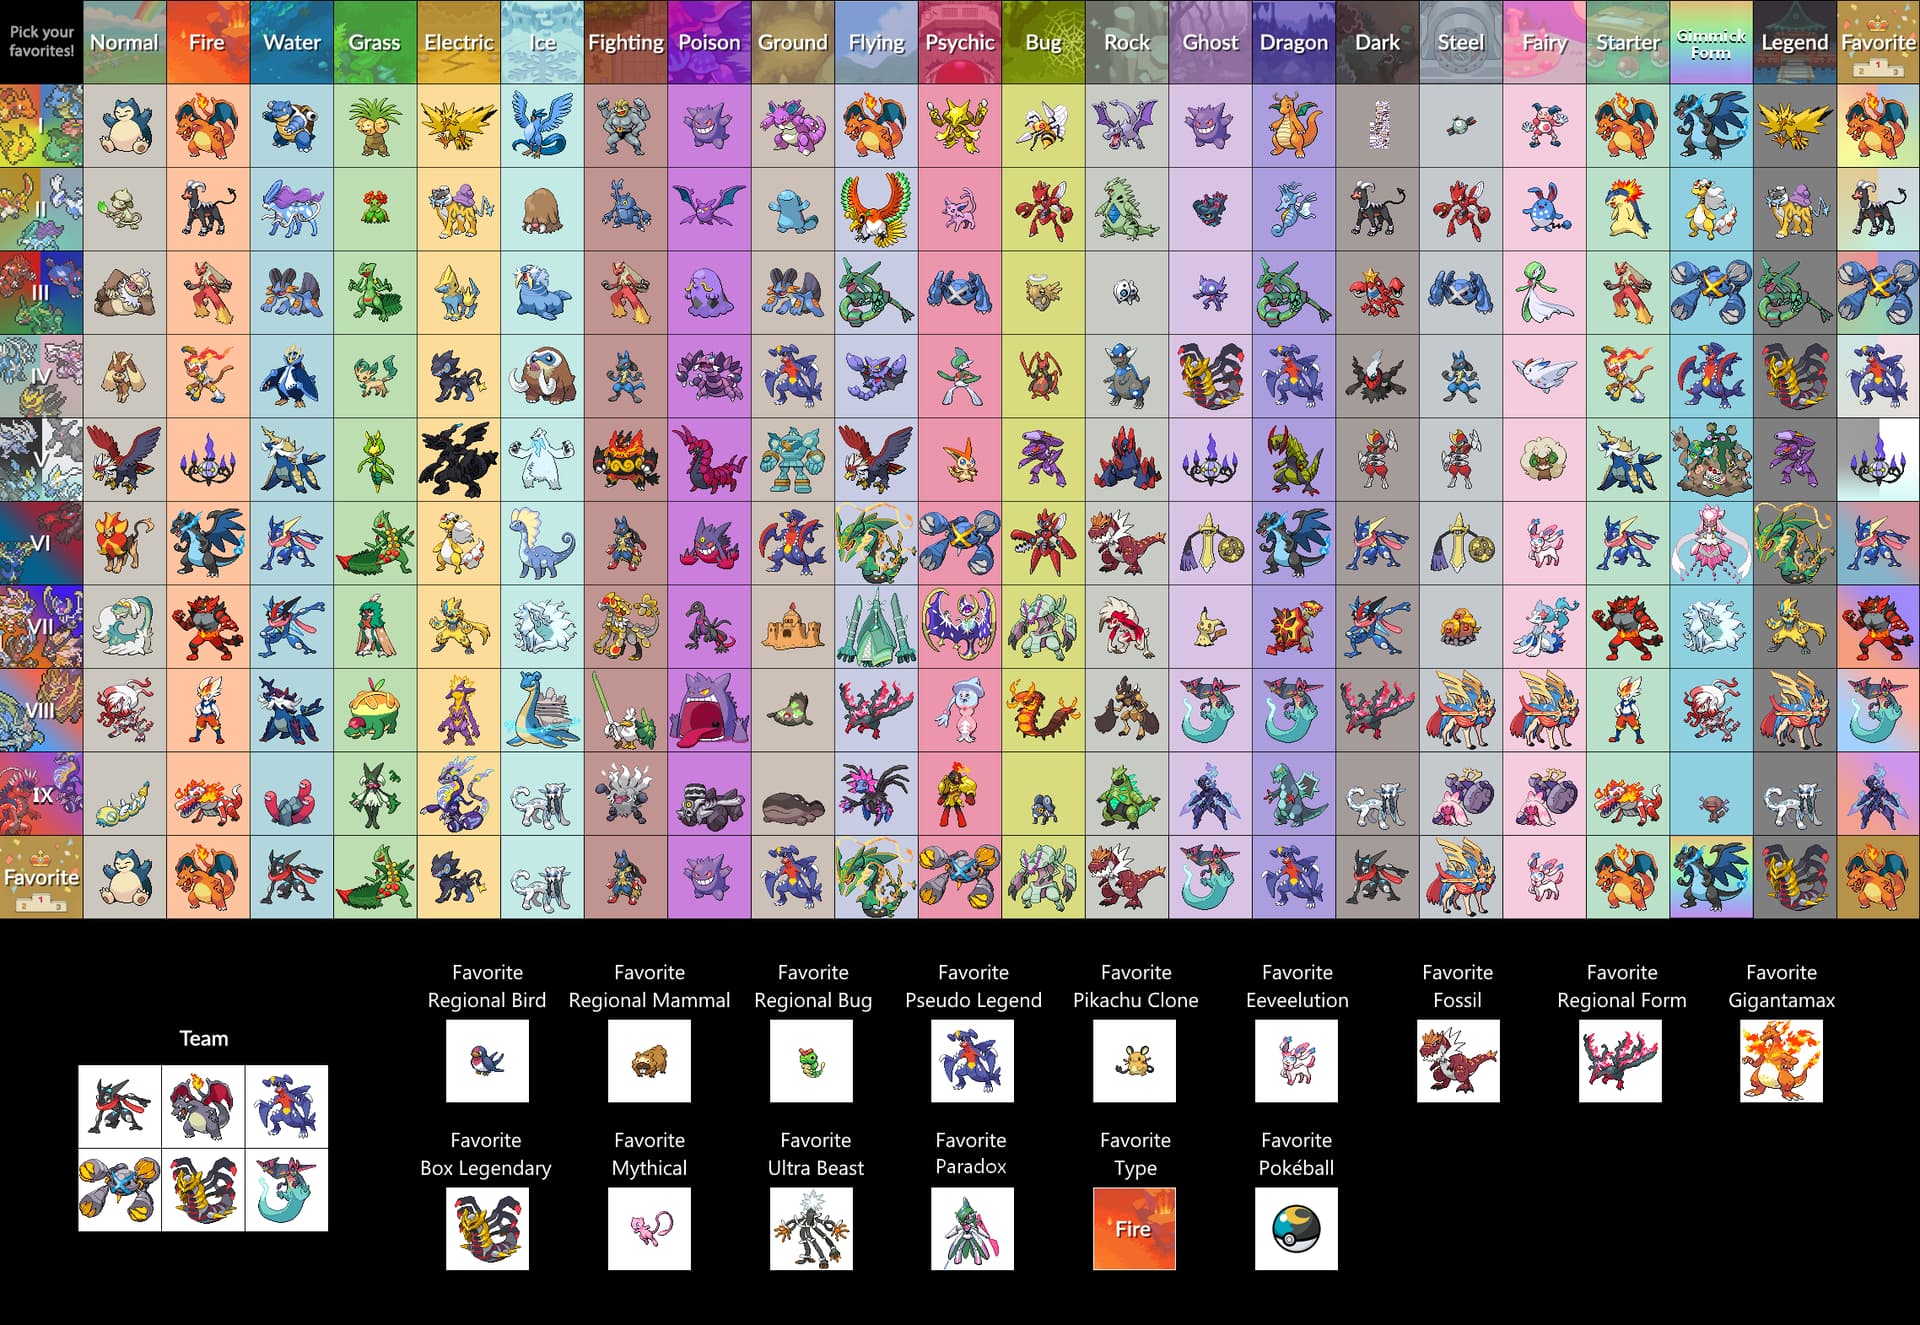 Every Single Pokémon Type Ranked: What's your tier list like